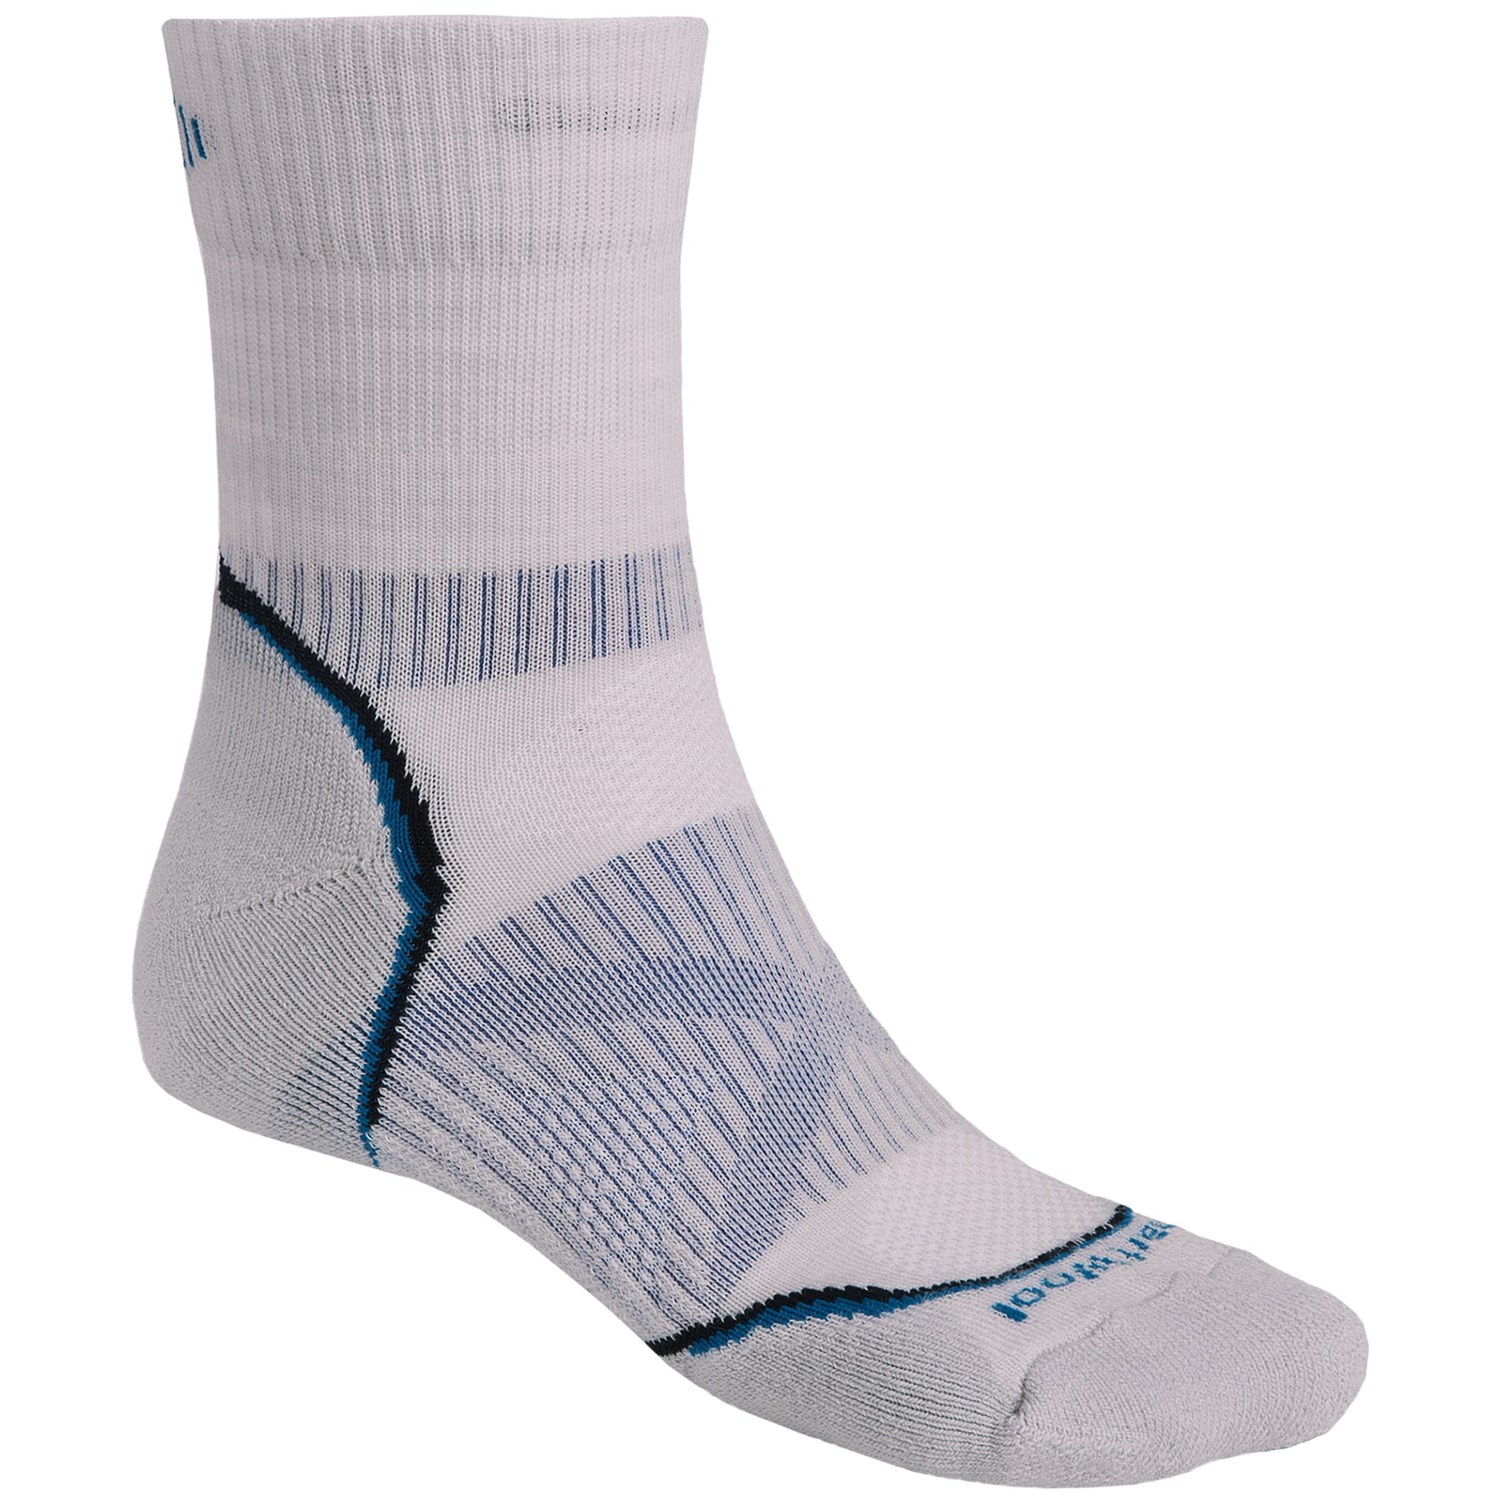 SmartWool 2013 PhD Cycle Light Socks (For Men and Women) 6325T